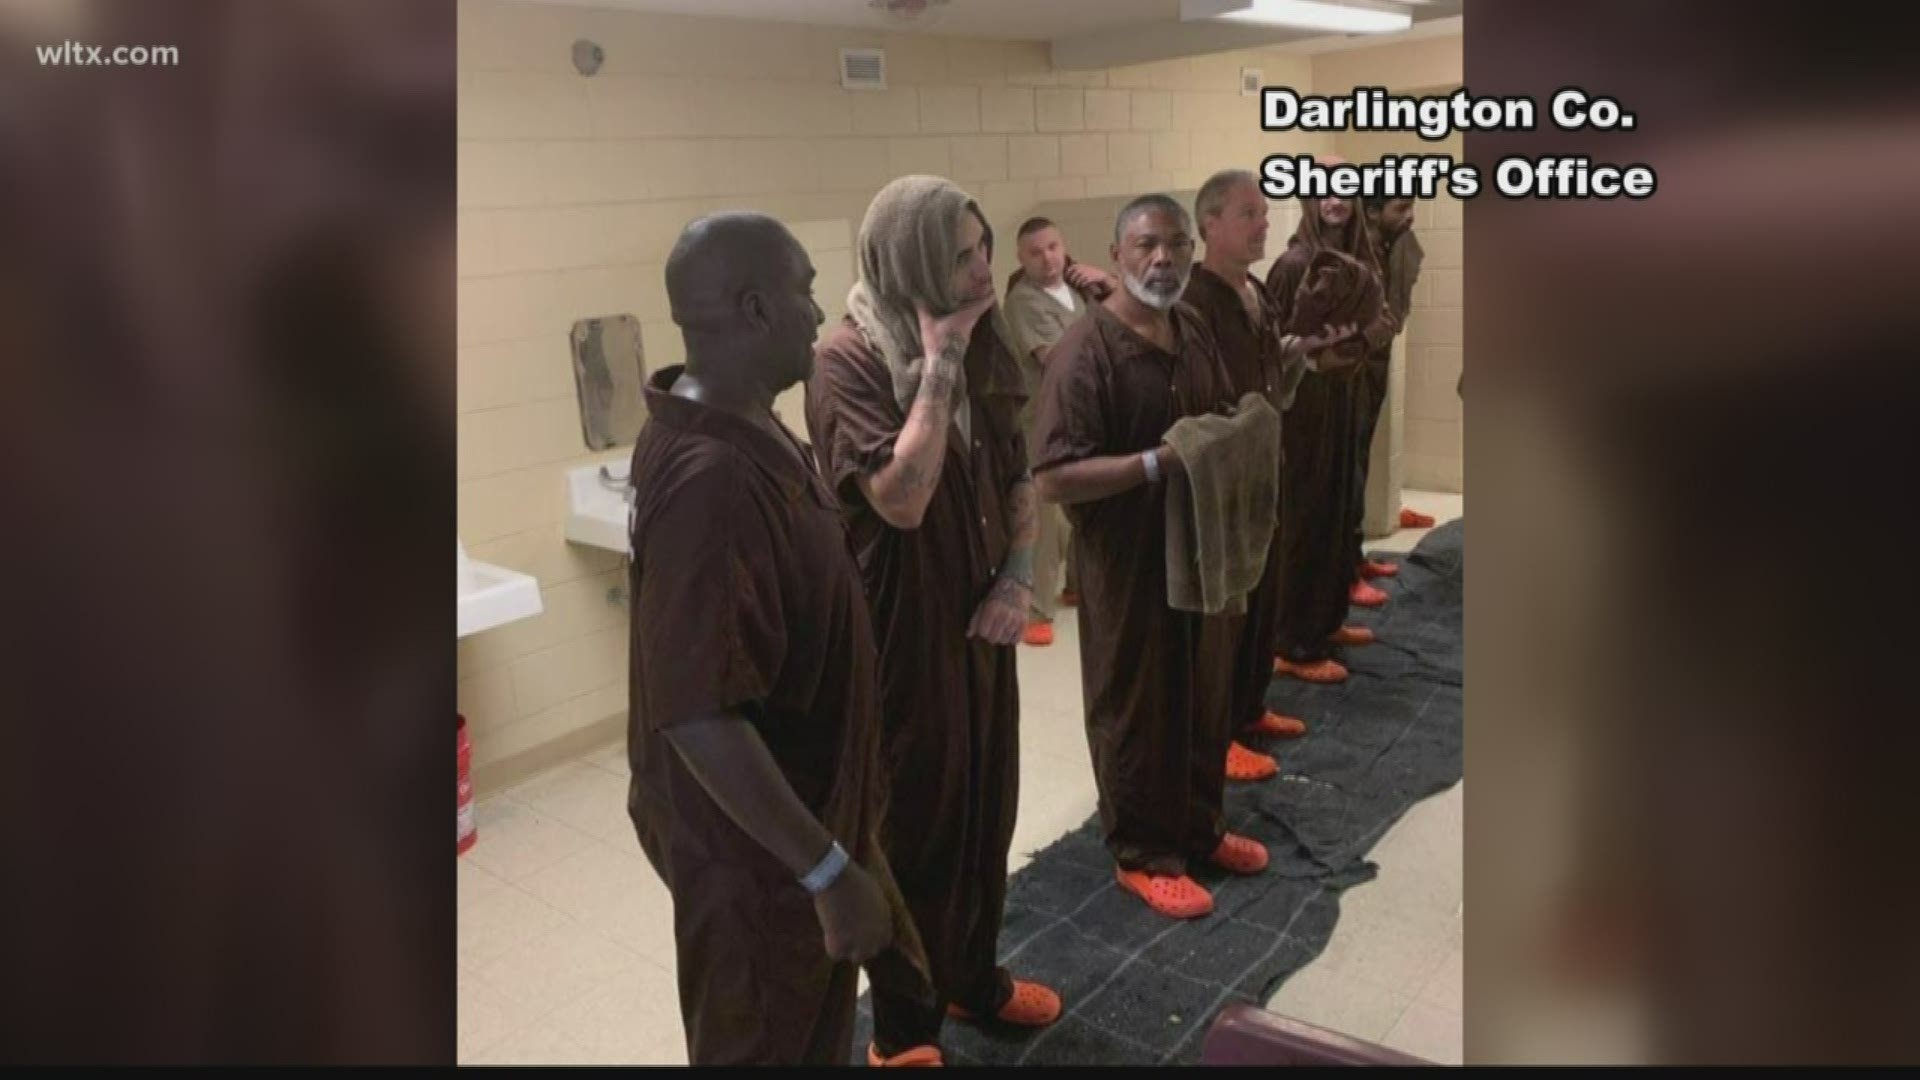 The 18 inmates baptized on Saturday have reportedly been mentored by a group of veterans and supported by the Darlington community.